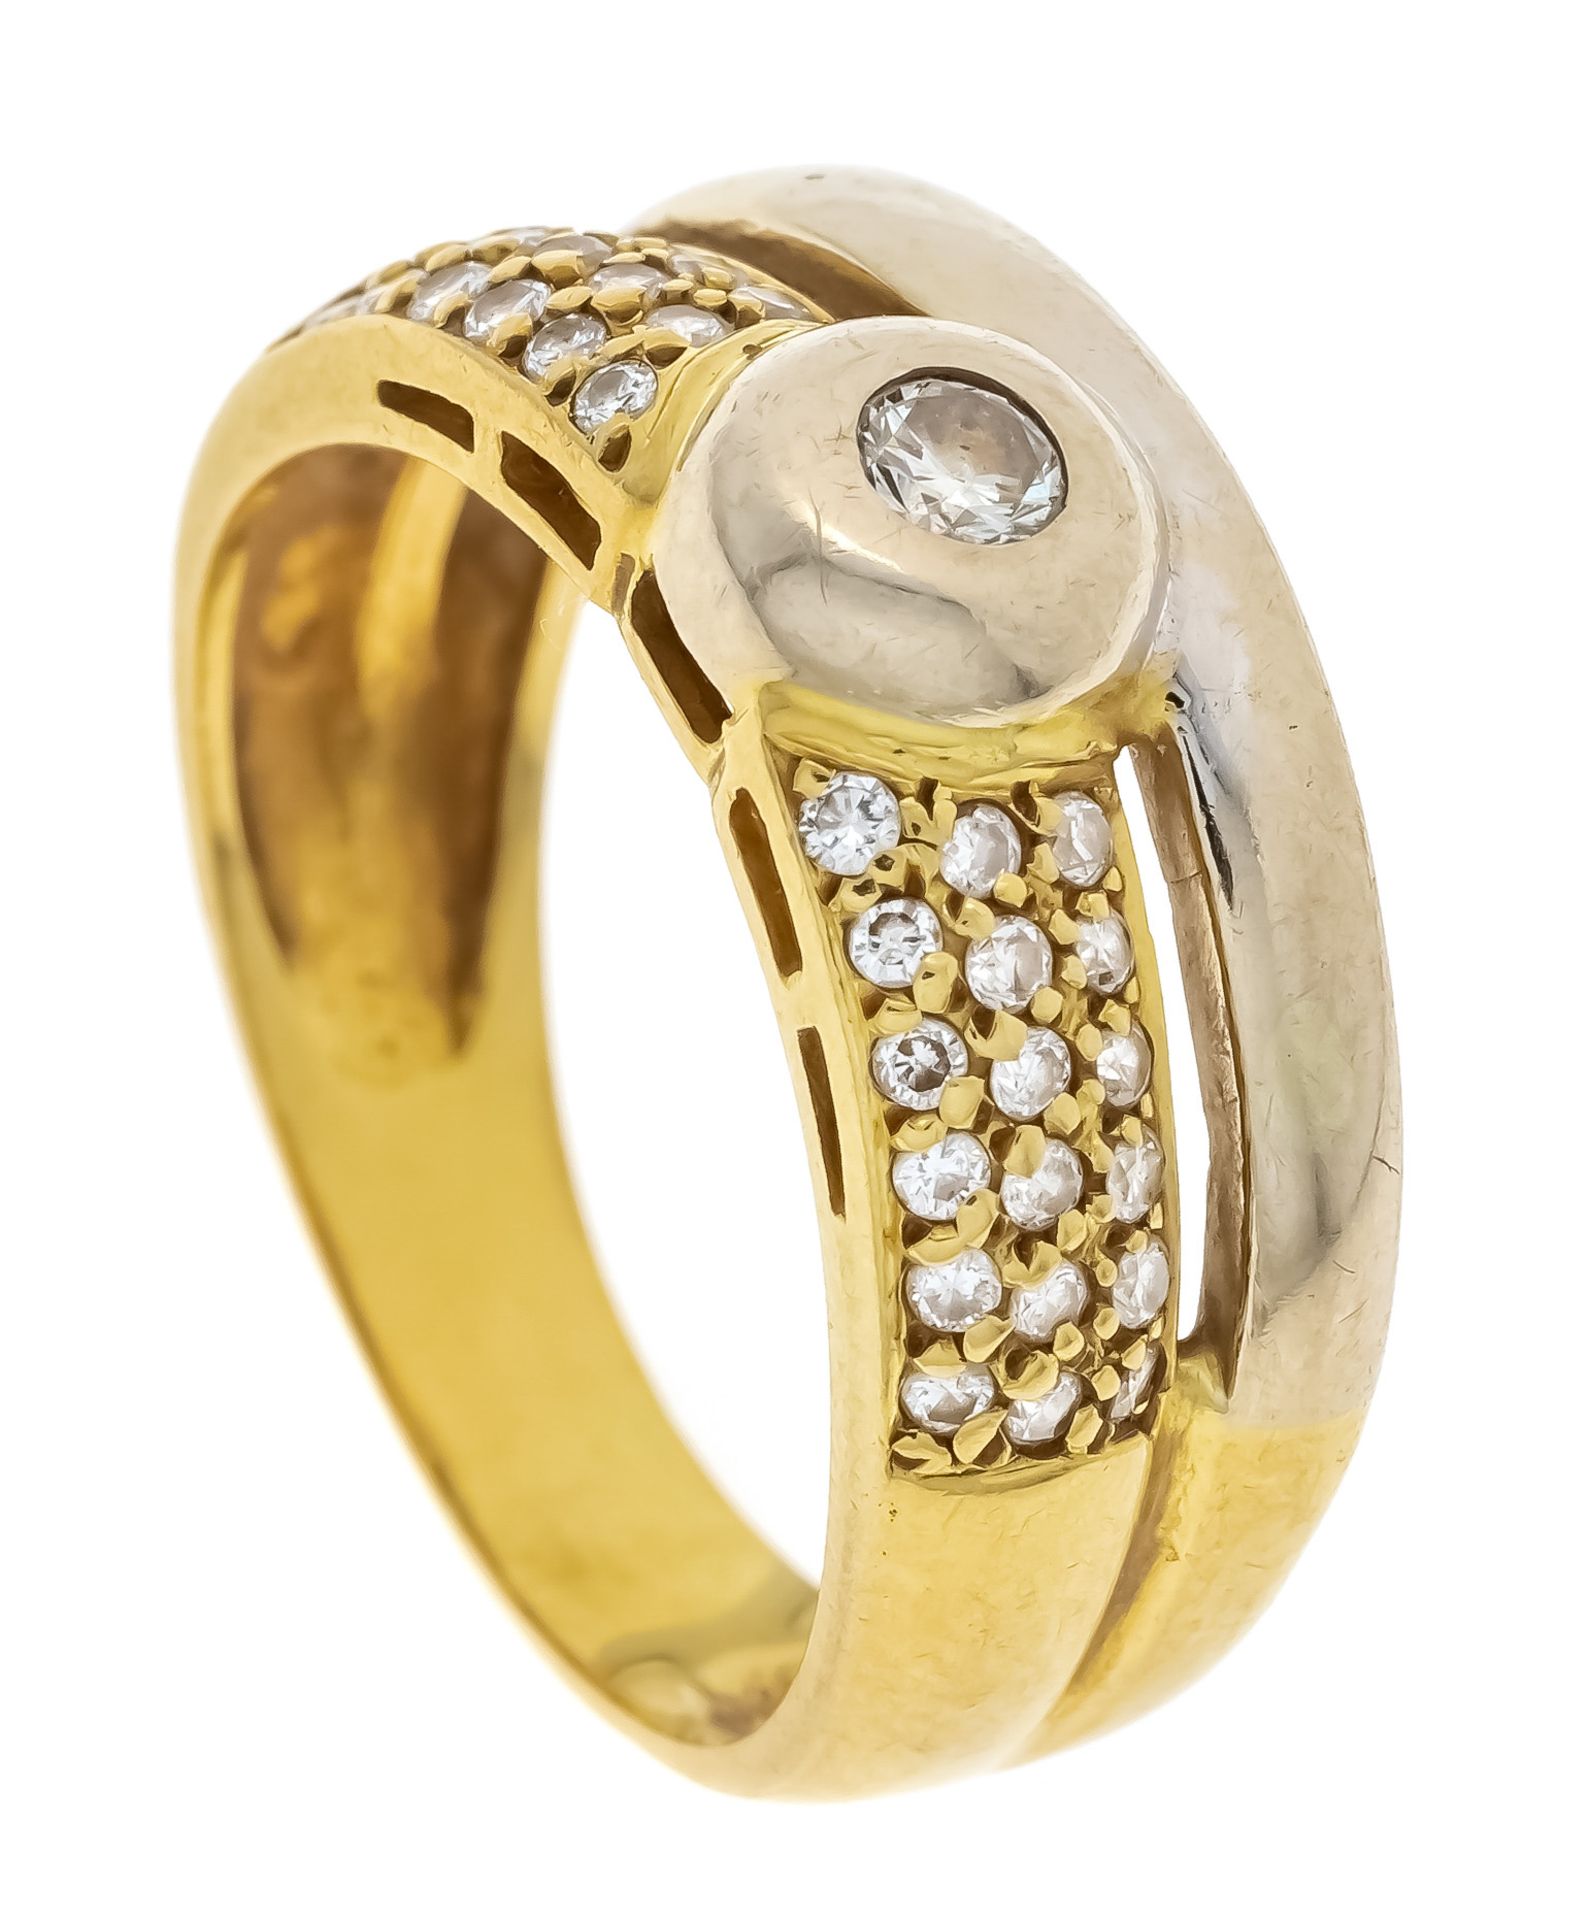 Brilliant ring GG 750/000 unstamped, tested, with 37 diamonds, total 0,25 ct W/VS-SI, RG 53, 4,8 g